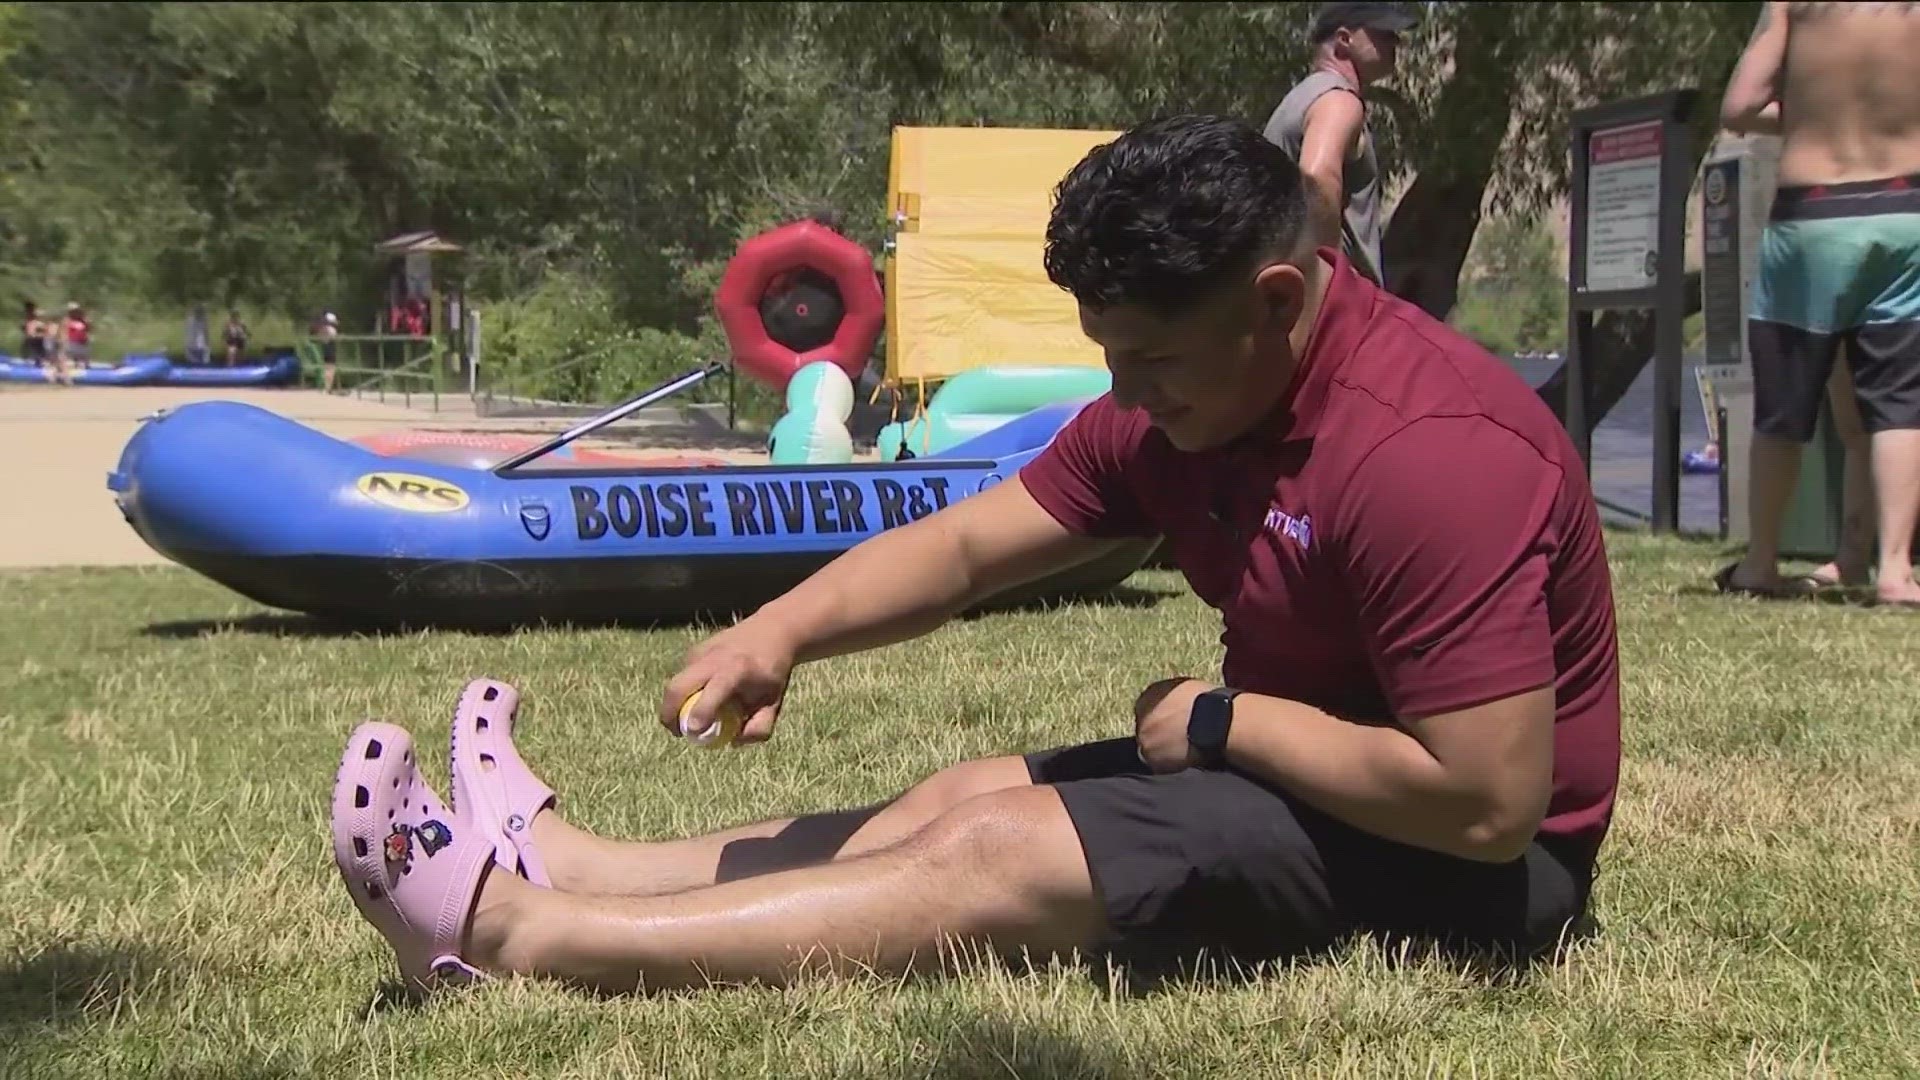 According to Boise Parks and Recreation, river visitation is off to a record-breaking start, up 20% from this time last summer.